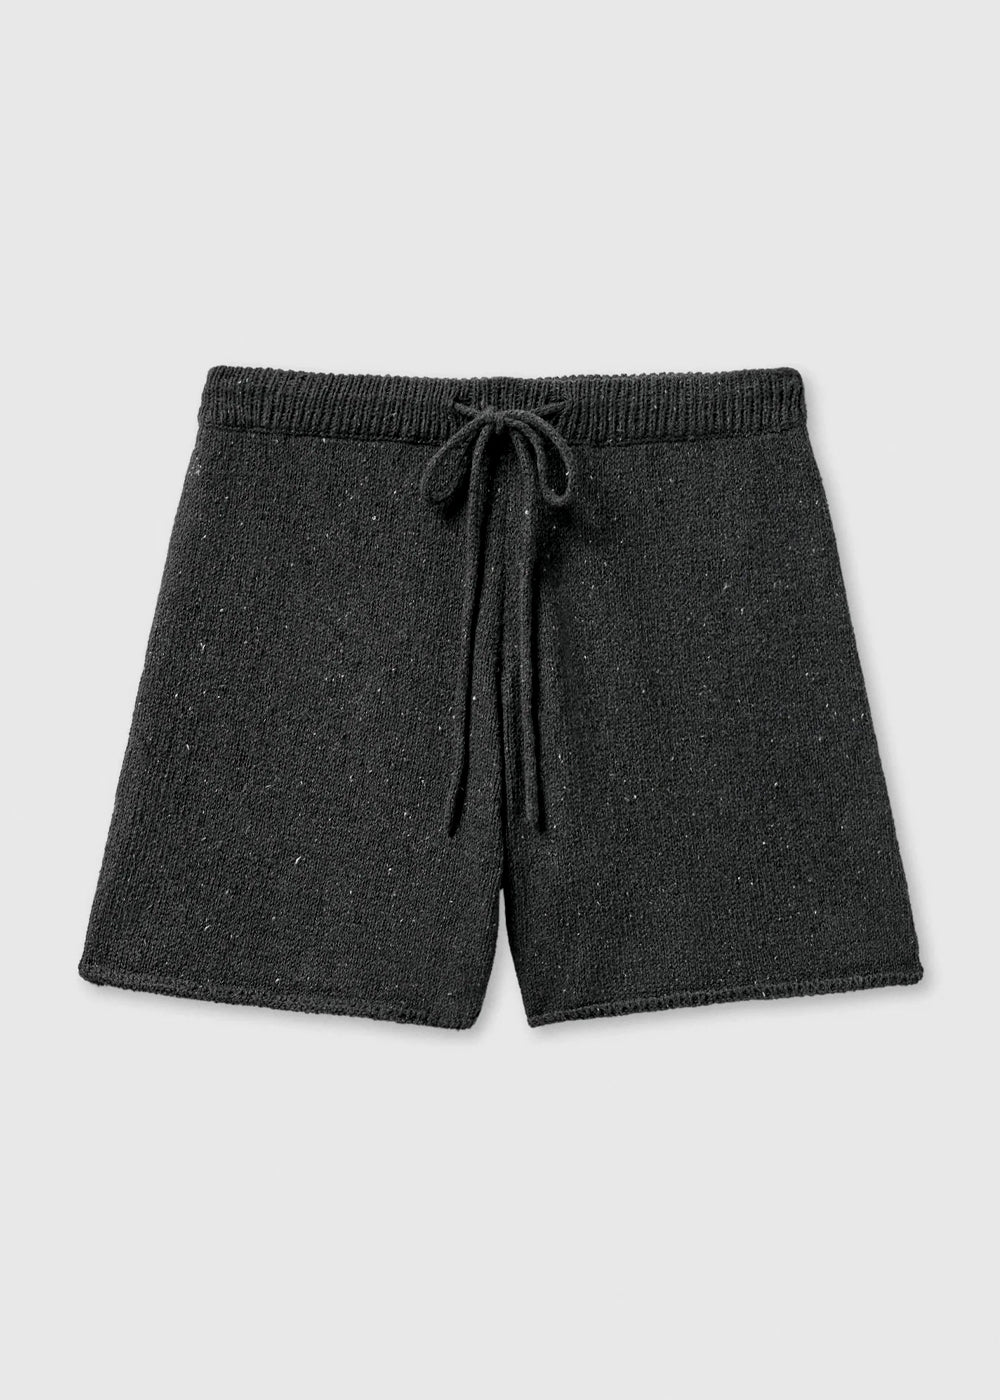 Charcoal Heather Cotton Shorts